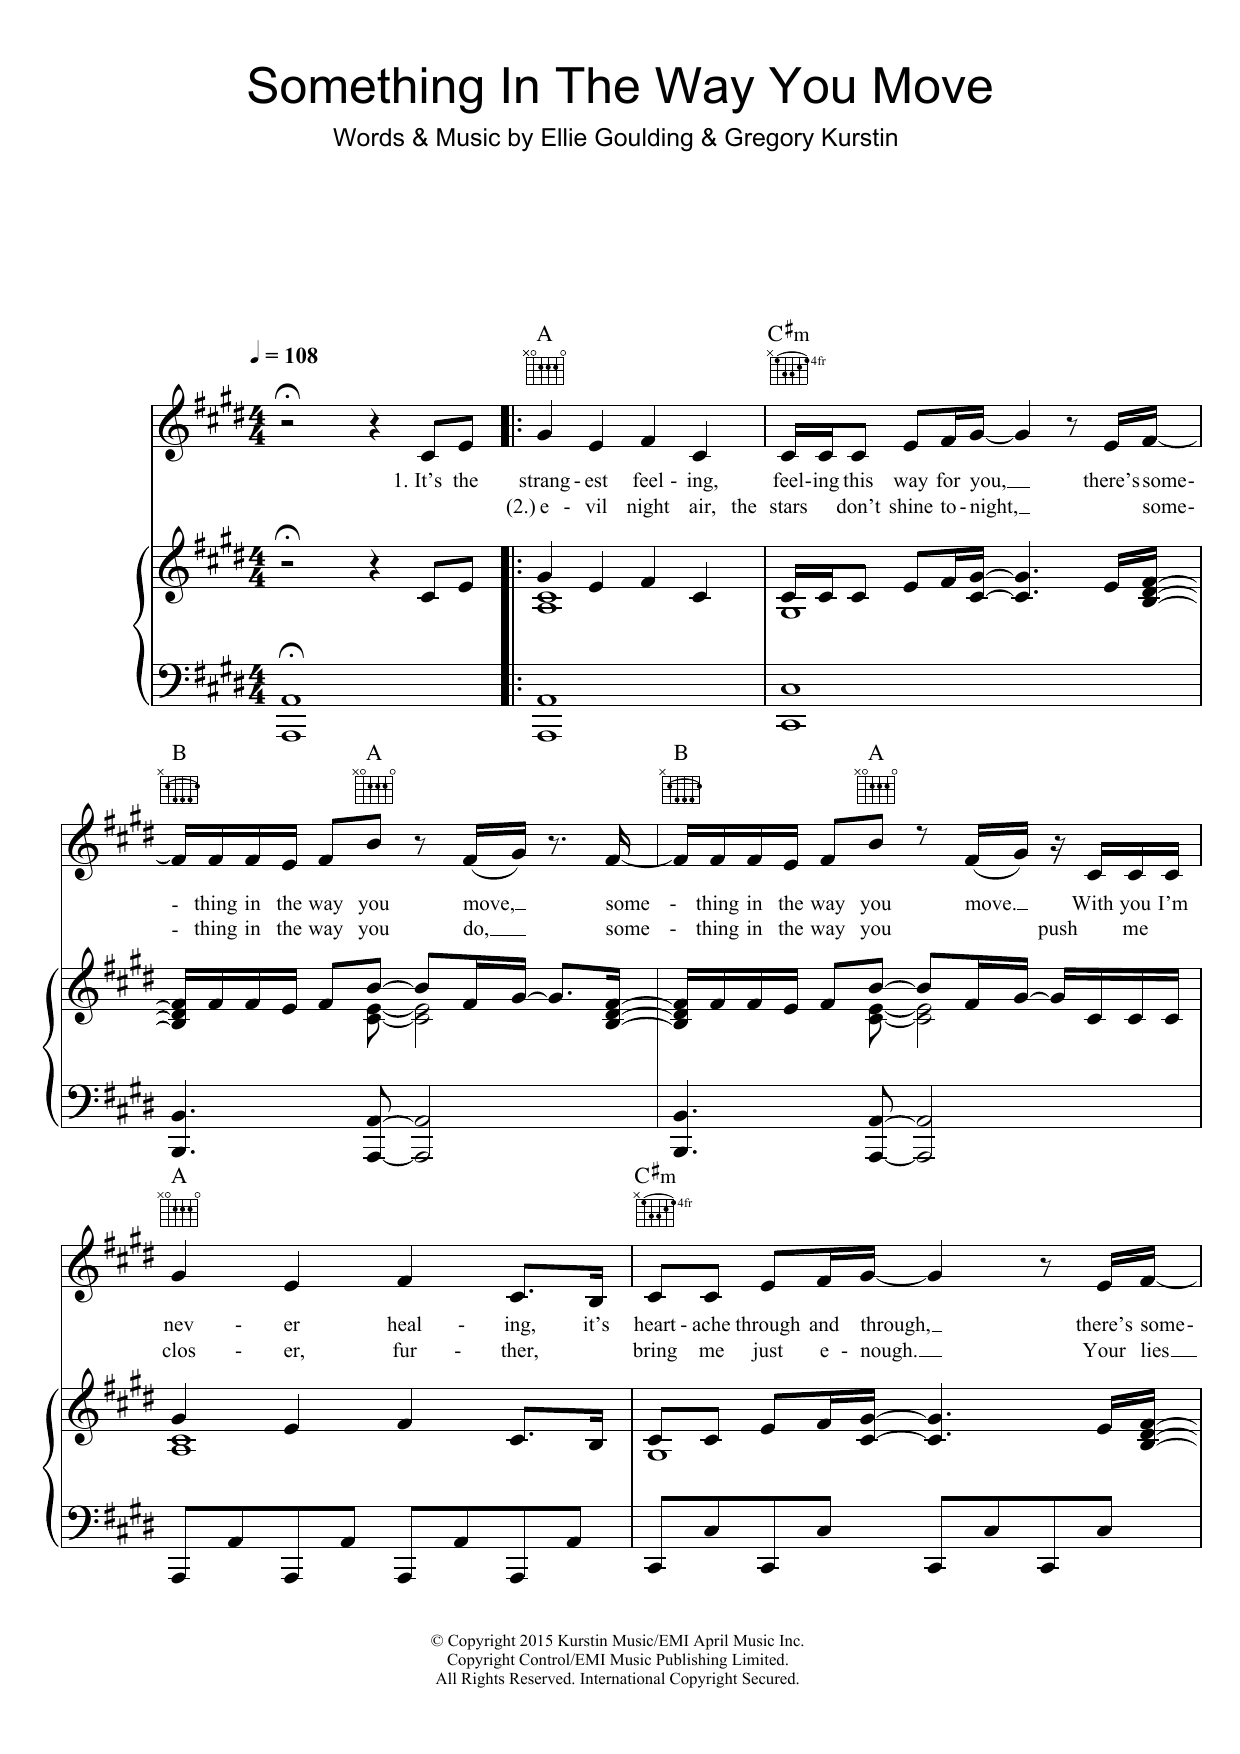 Download Ellie Goulding Something In The Way You Move Sheet Music